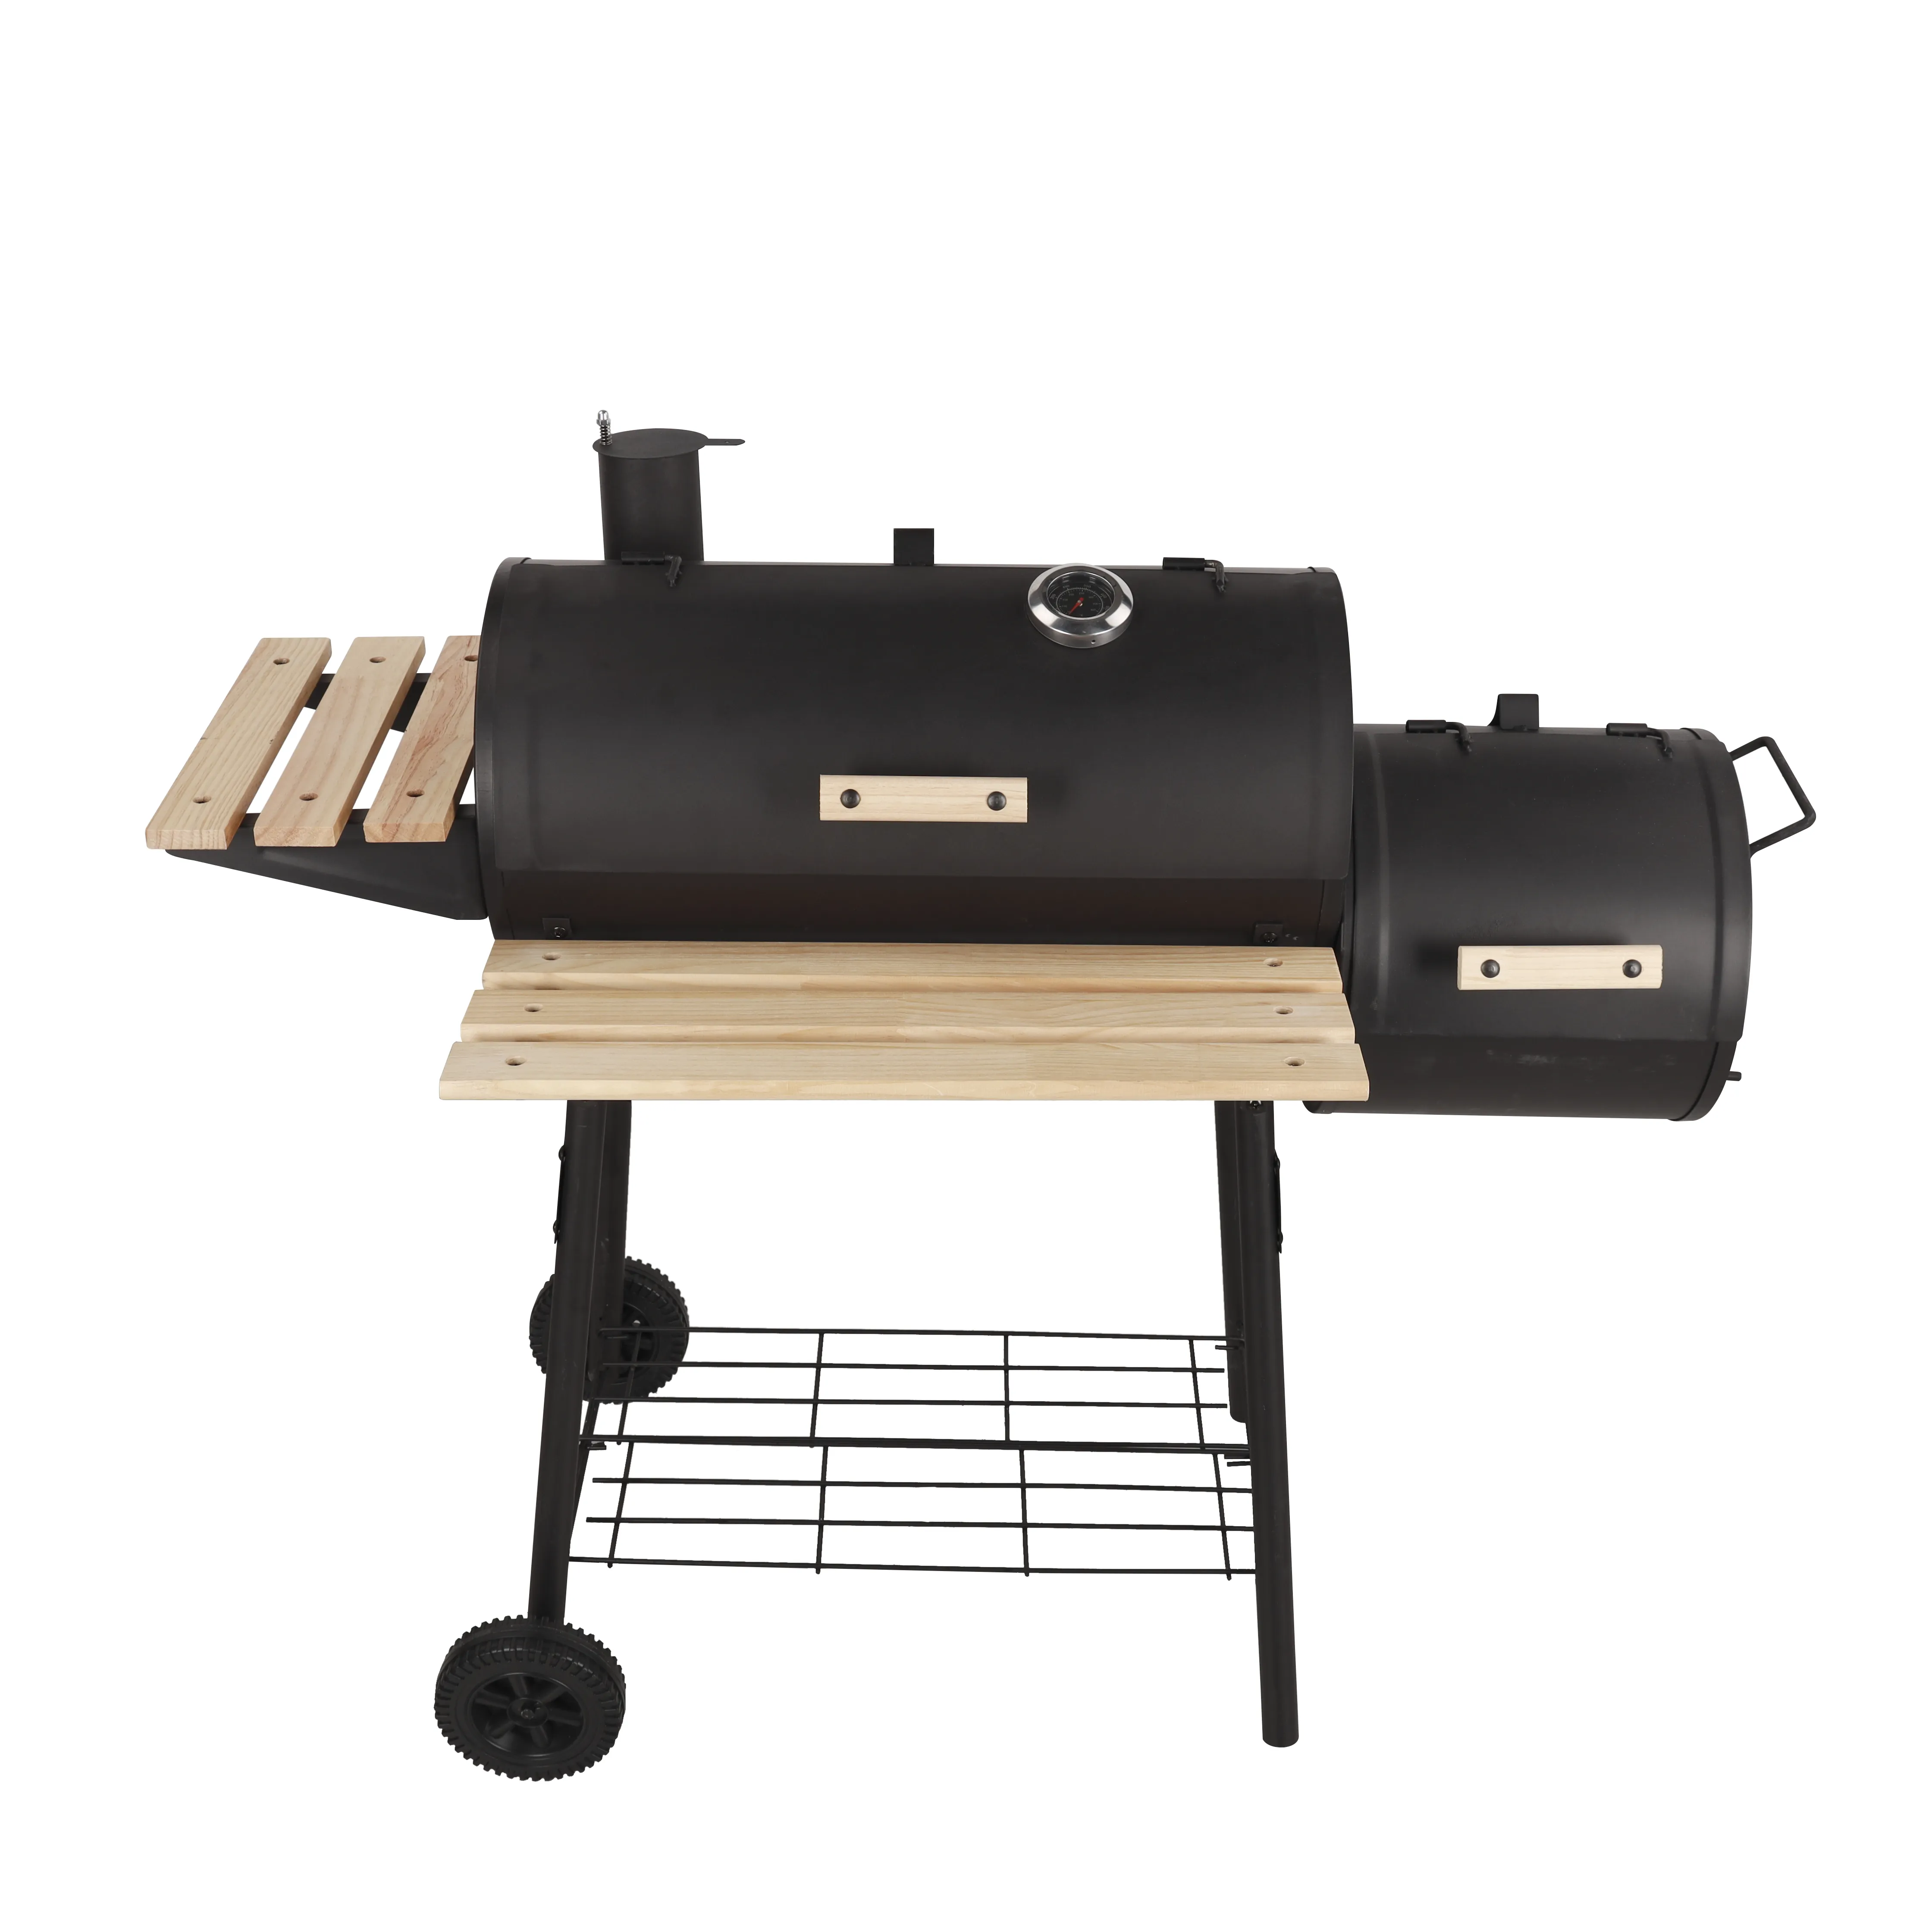 Royalford Barbecue Stand with Grill, Iron Construction, RF10370 Barbecue Grills with Wind Shield & Wheels Ideal for Camping, Backyard, Patio, Balcony Family Party